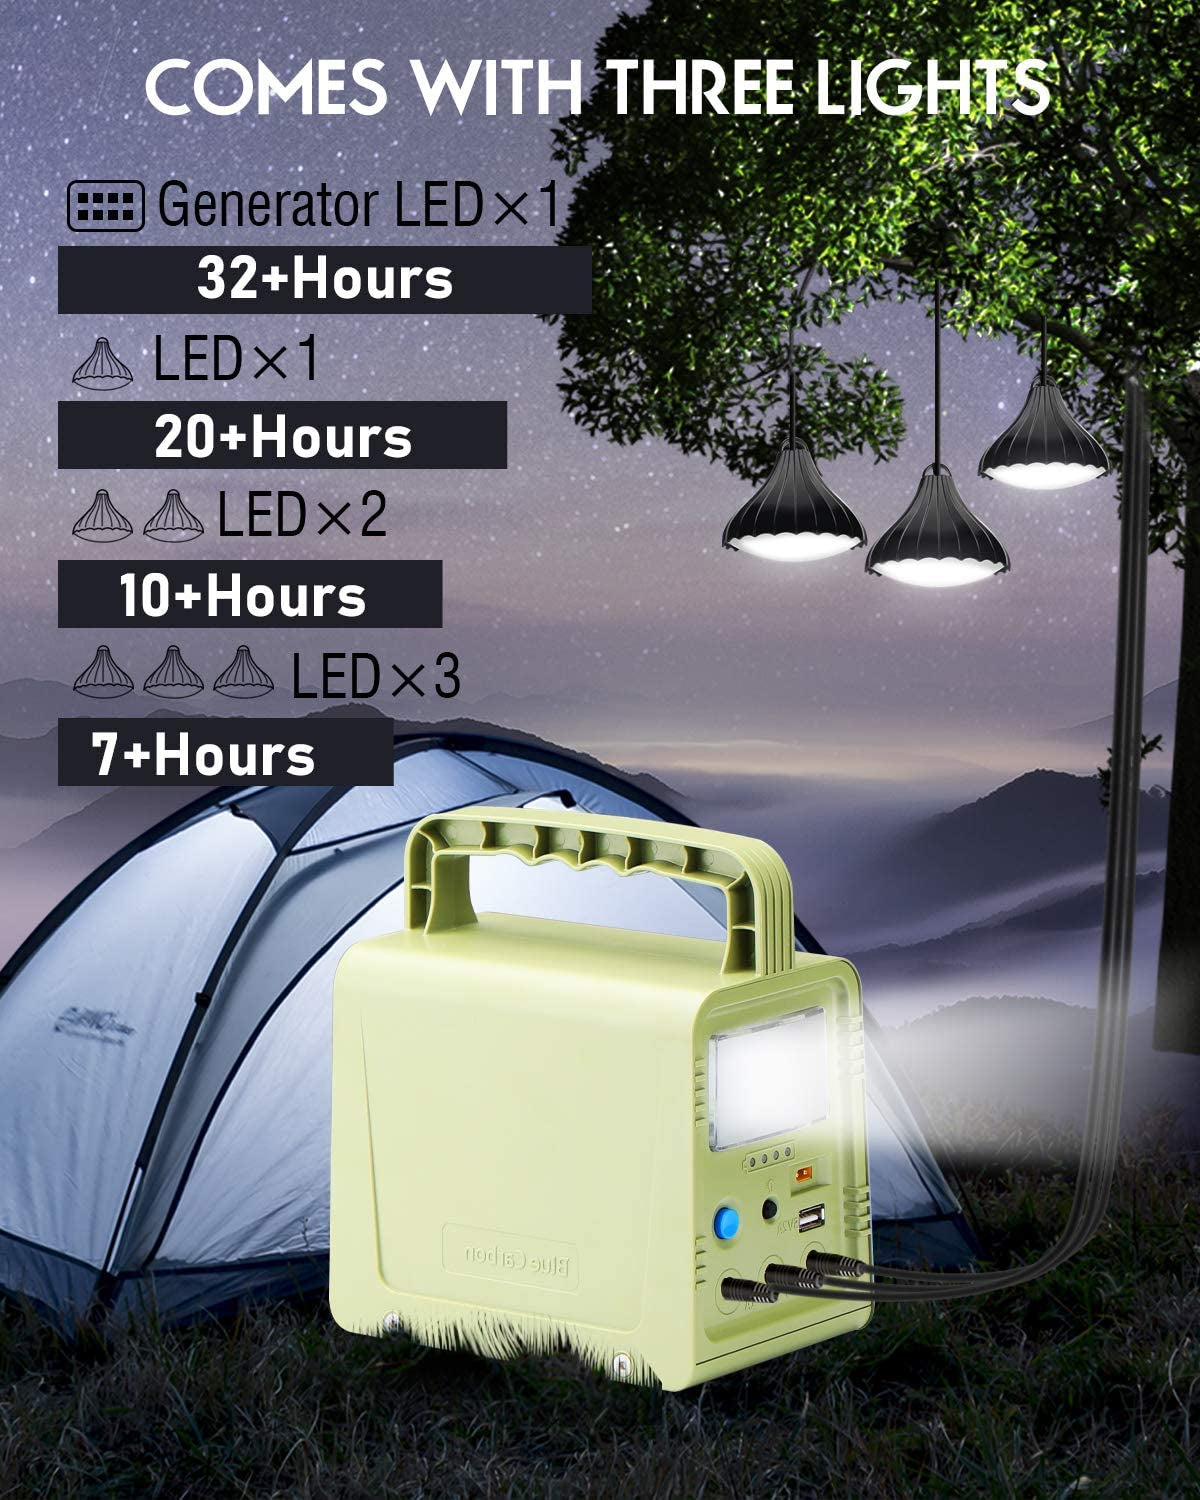 Portable Solar Generator 42Wh/84Wh, Portable Solar Power Station with Solar Panel & Flashlights, Rechargeable Home Emergency Power Bank, Camping Lights with Battery, USB DC Outlets, for Travel Fishing Hunting